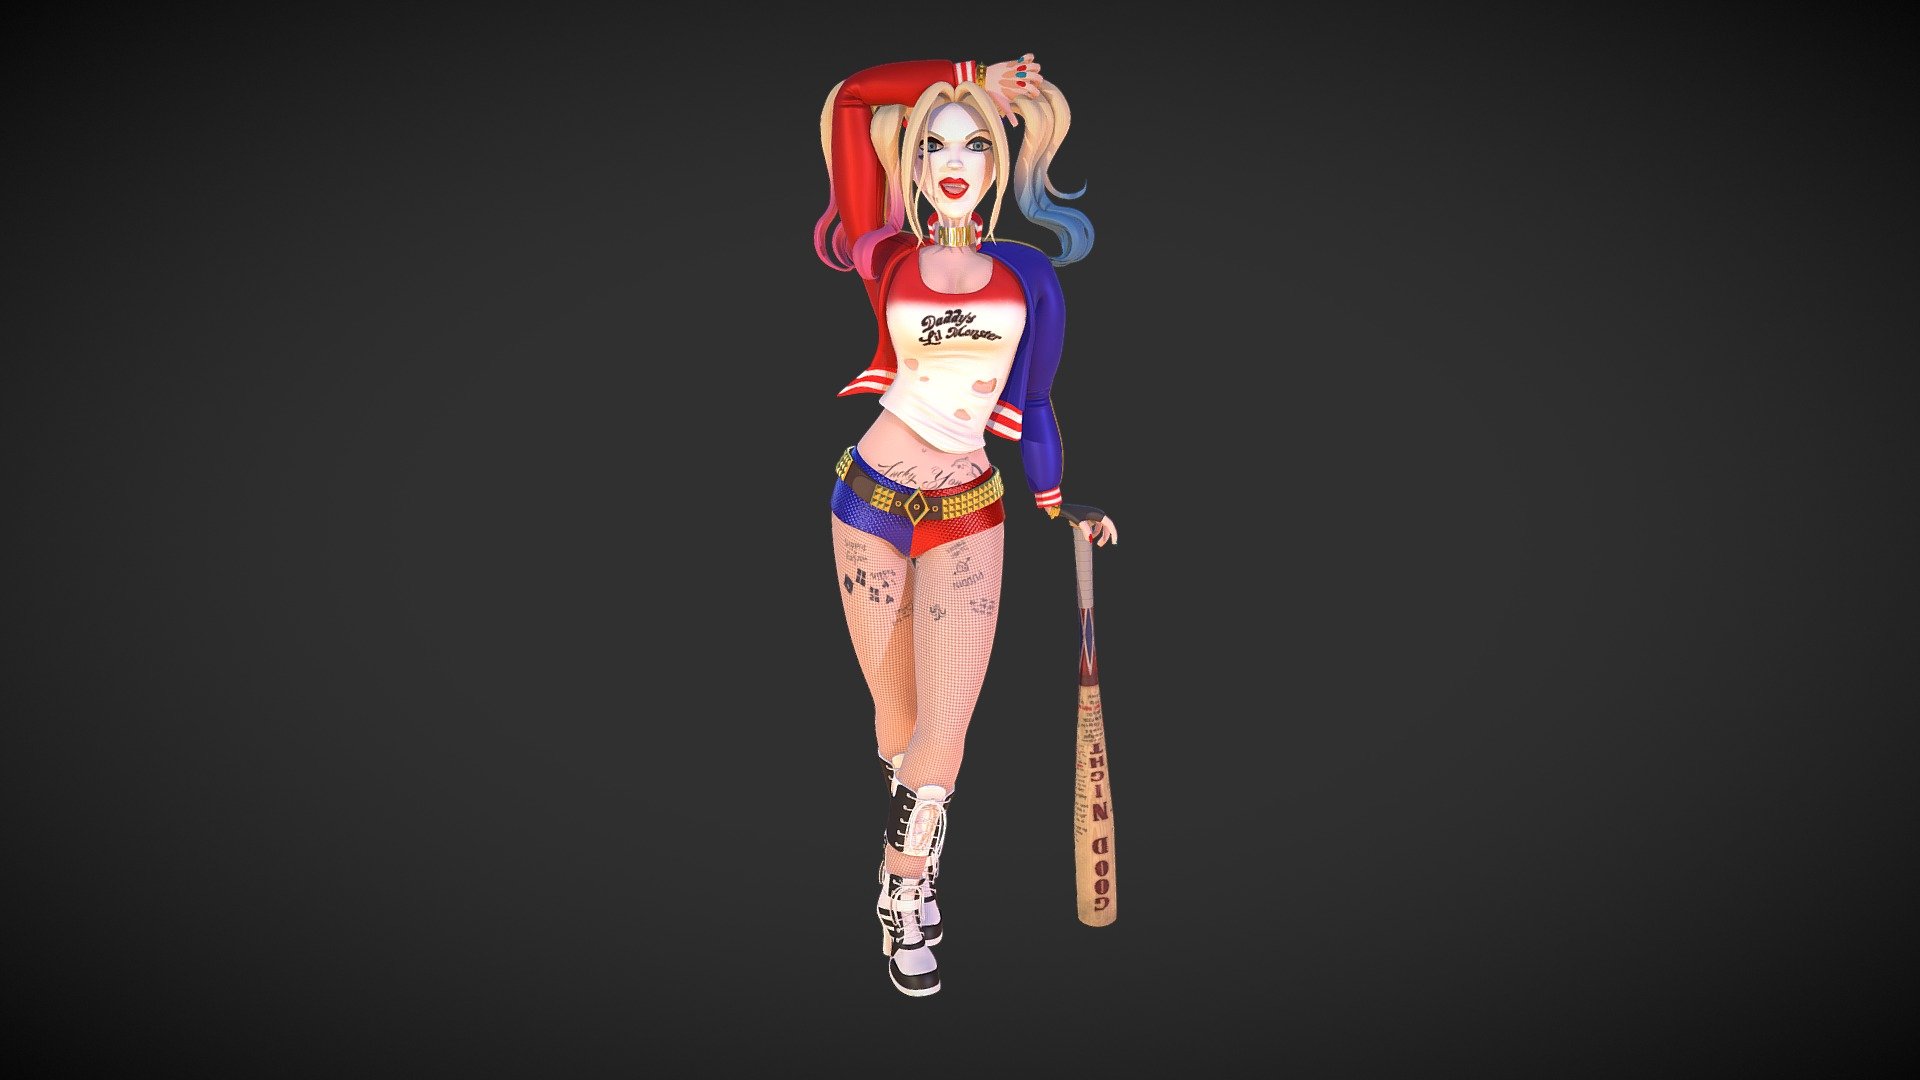 Model based on an illustration by the talented Laura García:



Love her style and love Margot Robbie as Harley Quinn so i had to give it a shot and do it in 3D. Hope i did it justice.

You can check her amazing artwork here:
https://www.artstation.com/artist/dennia

Also, you can visit my stuff over here:
https://www.artstation.com/artist/marcoloreto - Harley Quinn - 3D model by marcoloreto 3d model